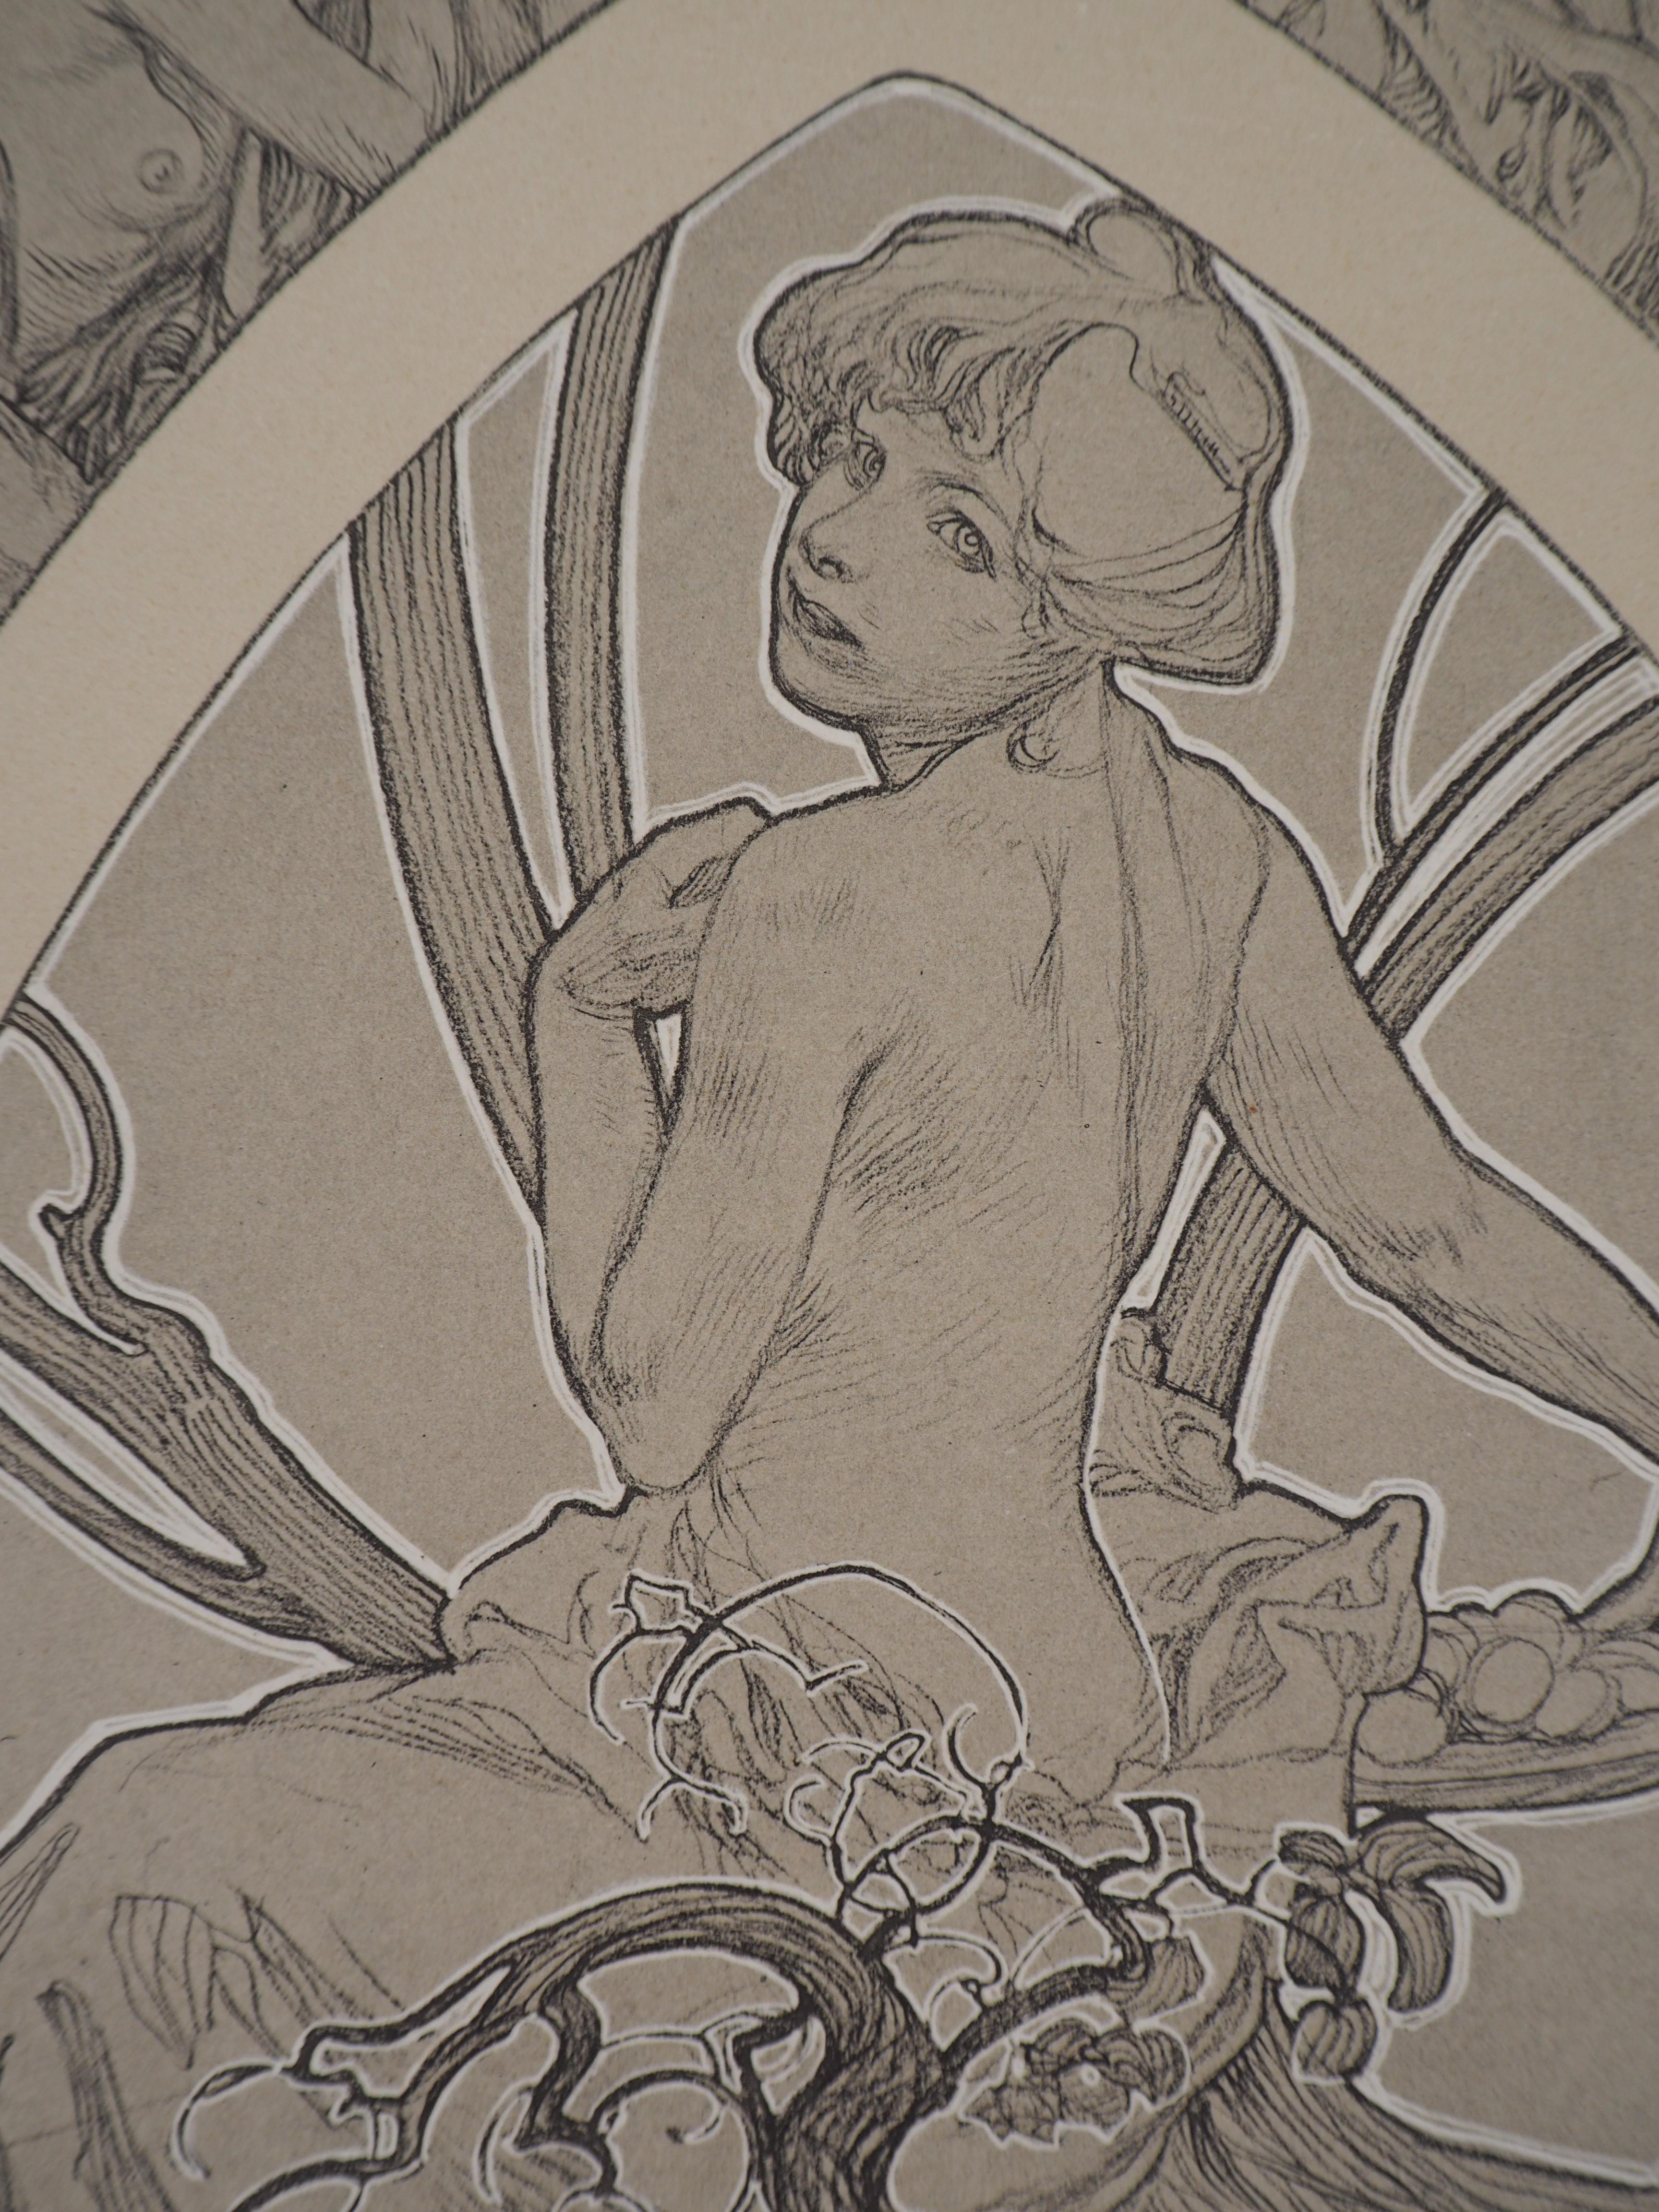 Alphonse MUCHA
Women in the Garden

Lithograph
Printed signature bottom left
On heavy paper 45.5 x 33 cm (c. 18 x 13 inch)
Plate n°1 of the portfolio Figures Decoratives published by La Librairie Centrale des Beaux-Arts, published in 1902. Bearing